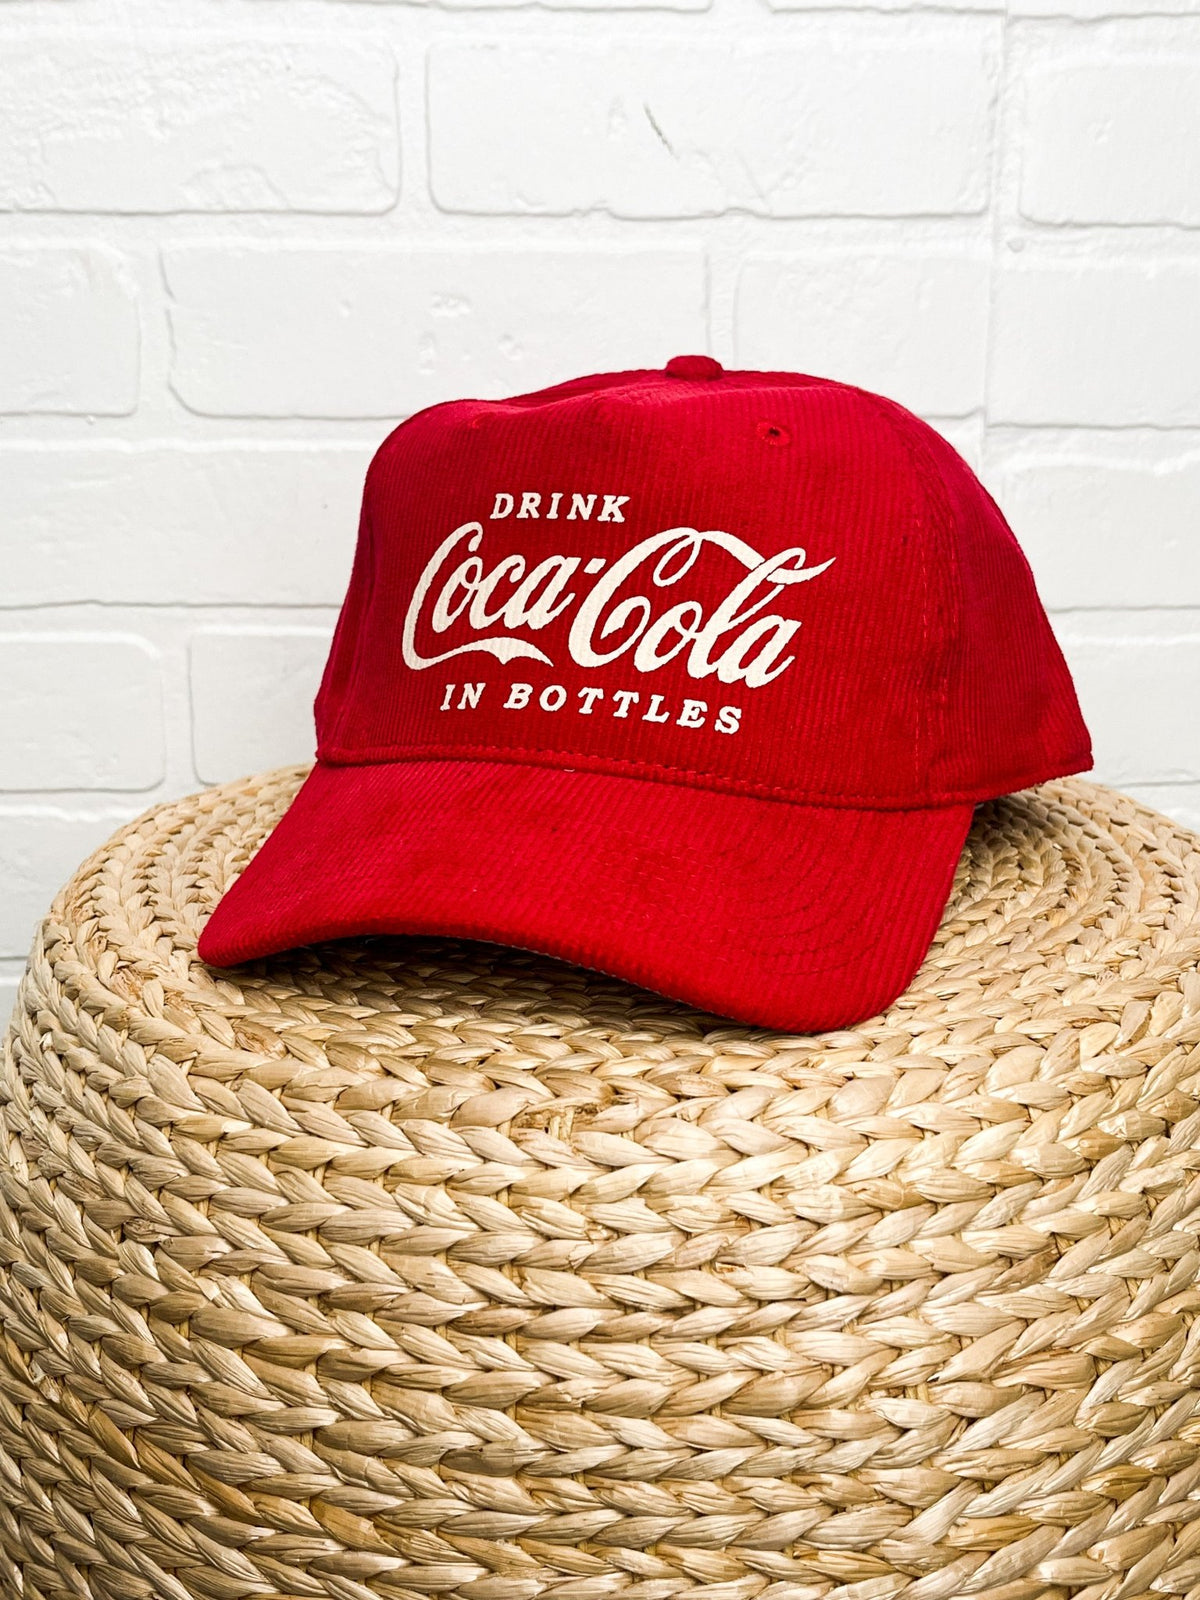 Coca Cola corduroy hat red - Trendy Gifts at Lush Fashion Lounge Boutique in Oklahoma City